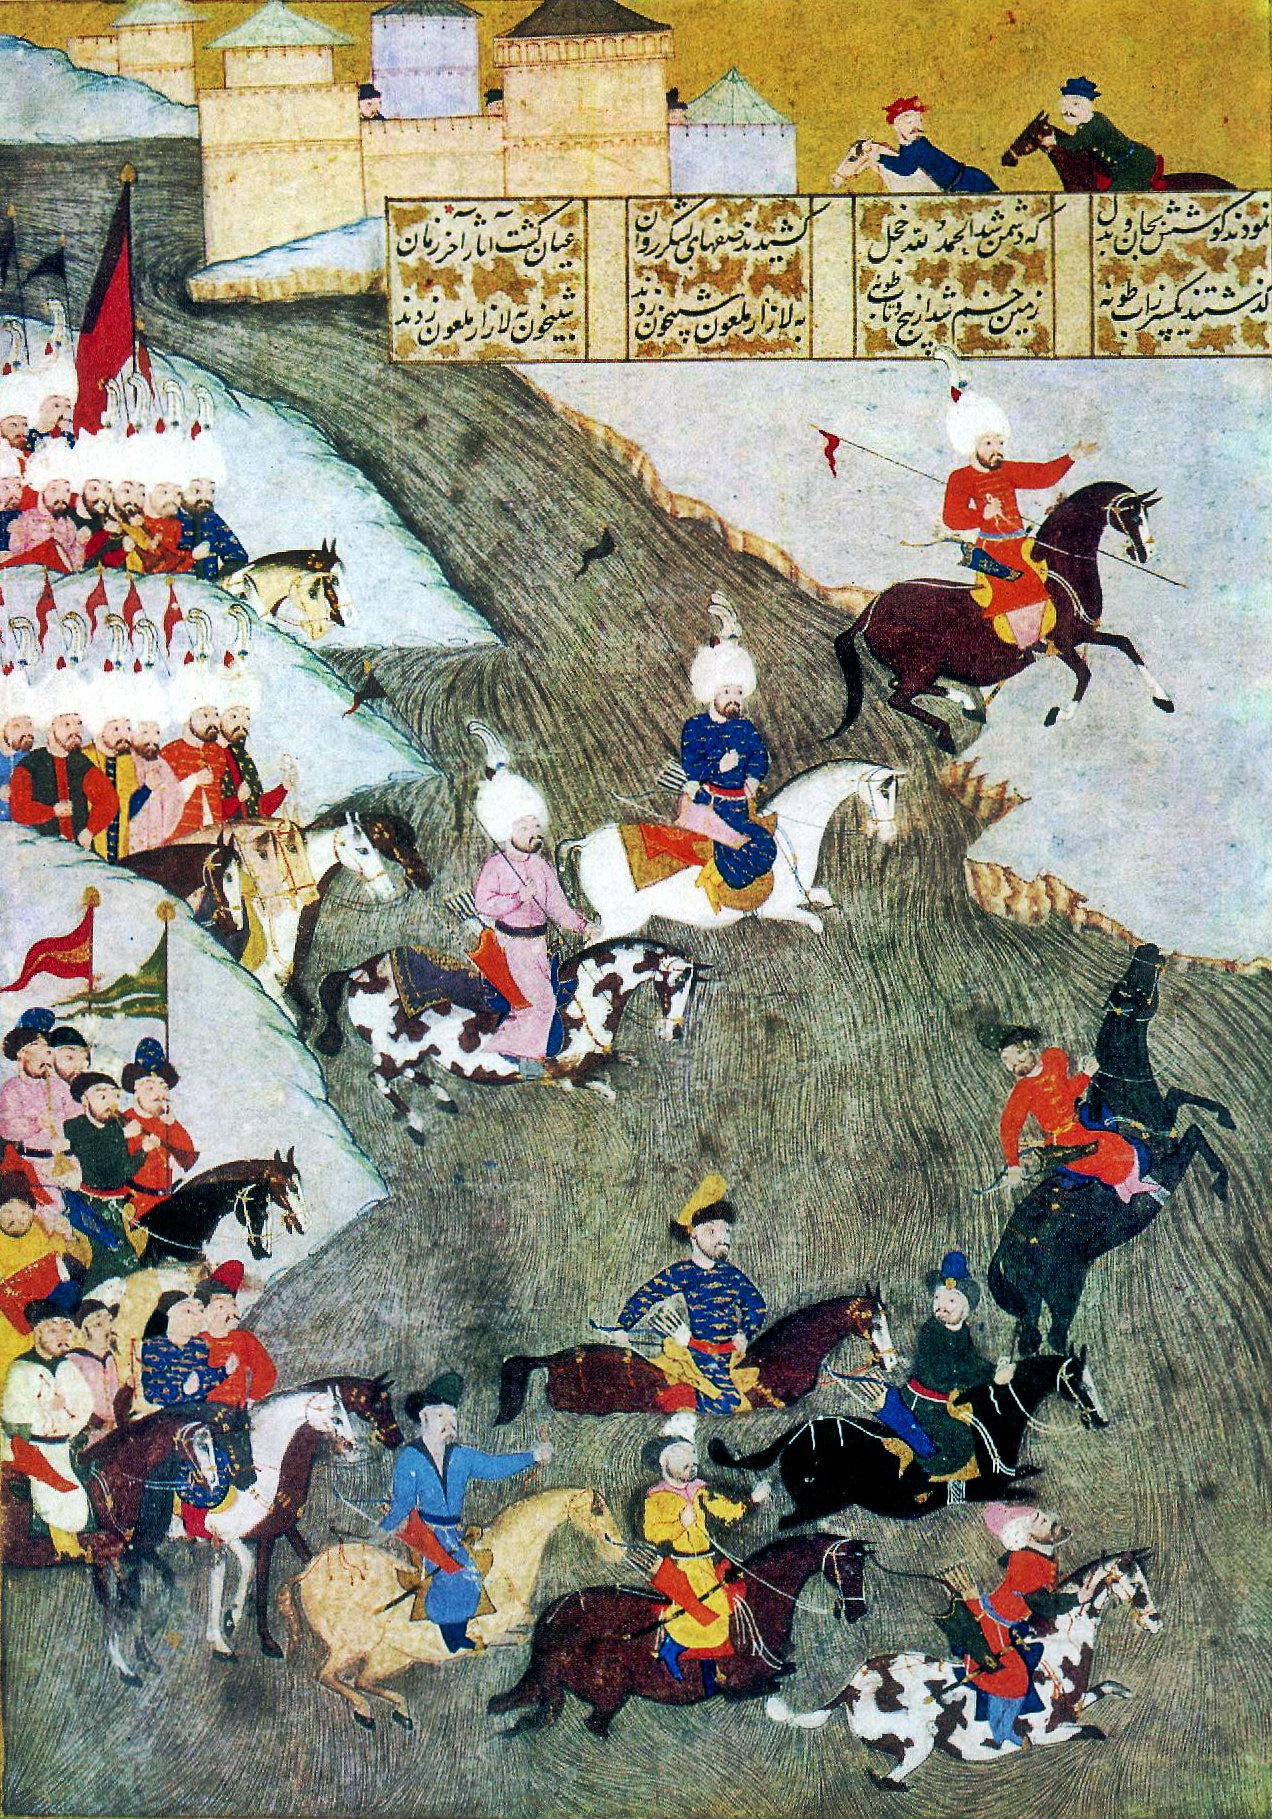 A miniature depicting the Ottoman campaign in Hungary in 1566, with Crimean Tatars as vanguard